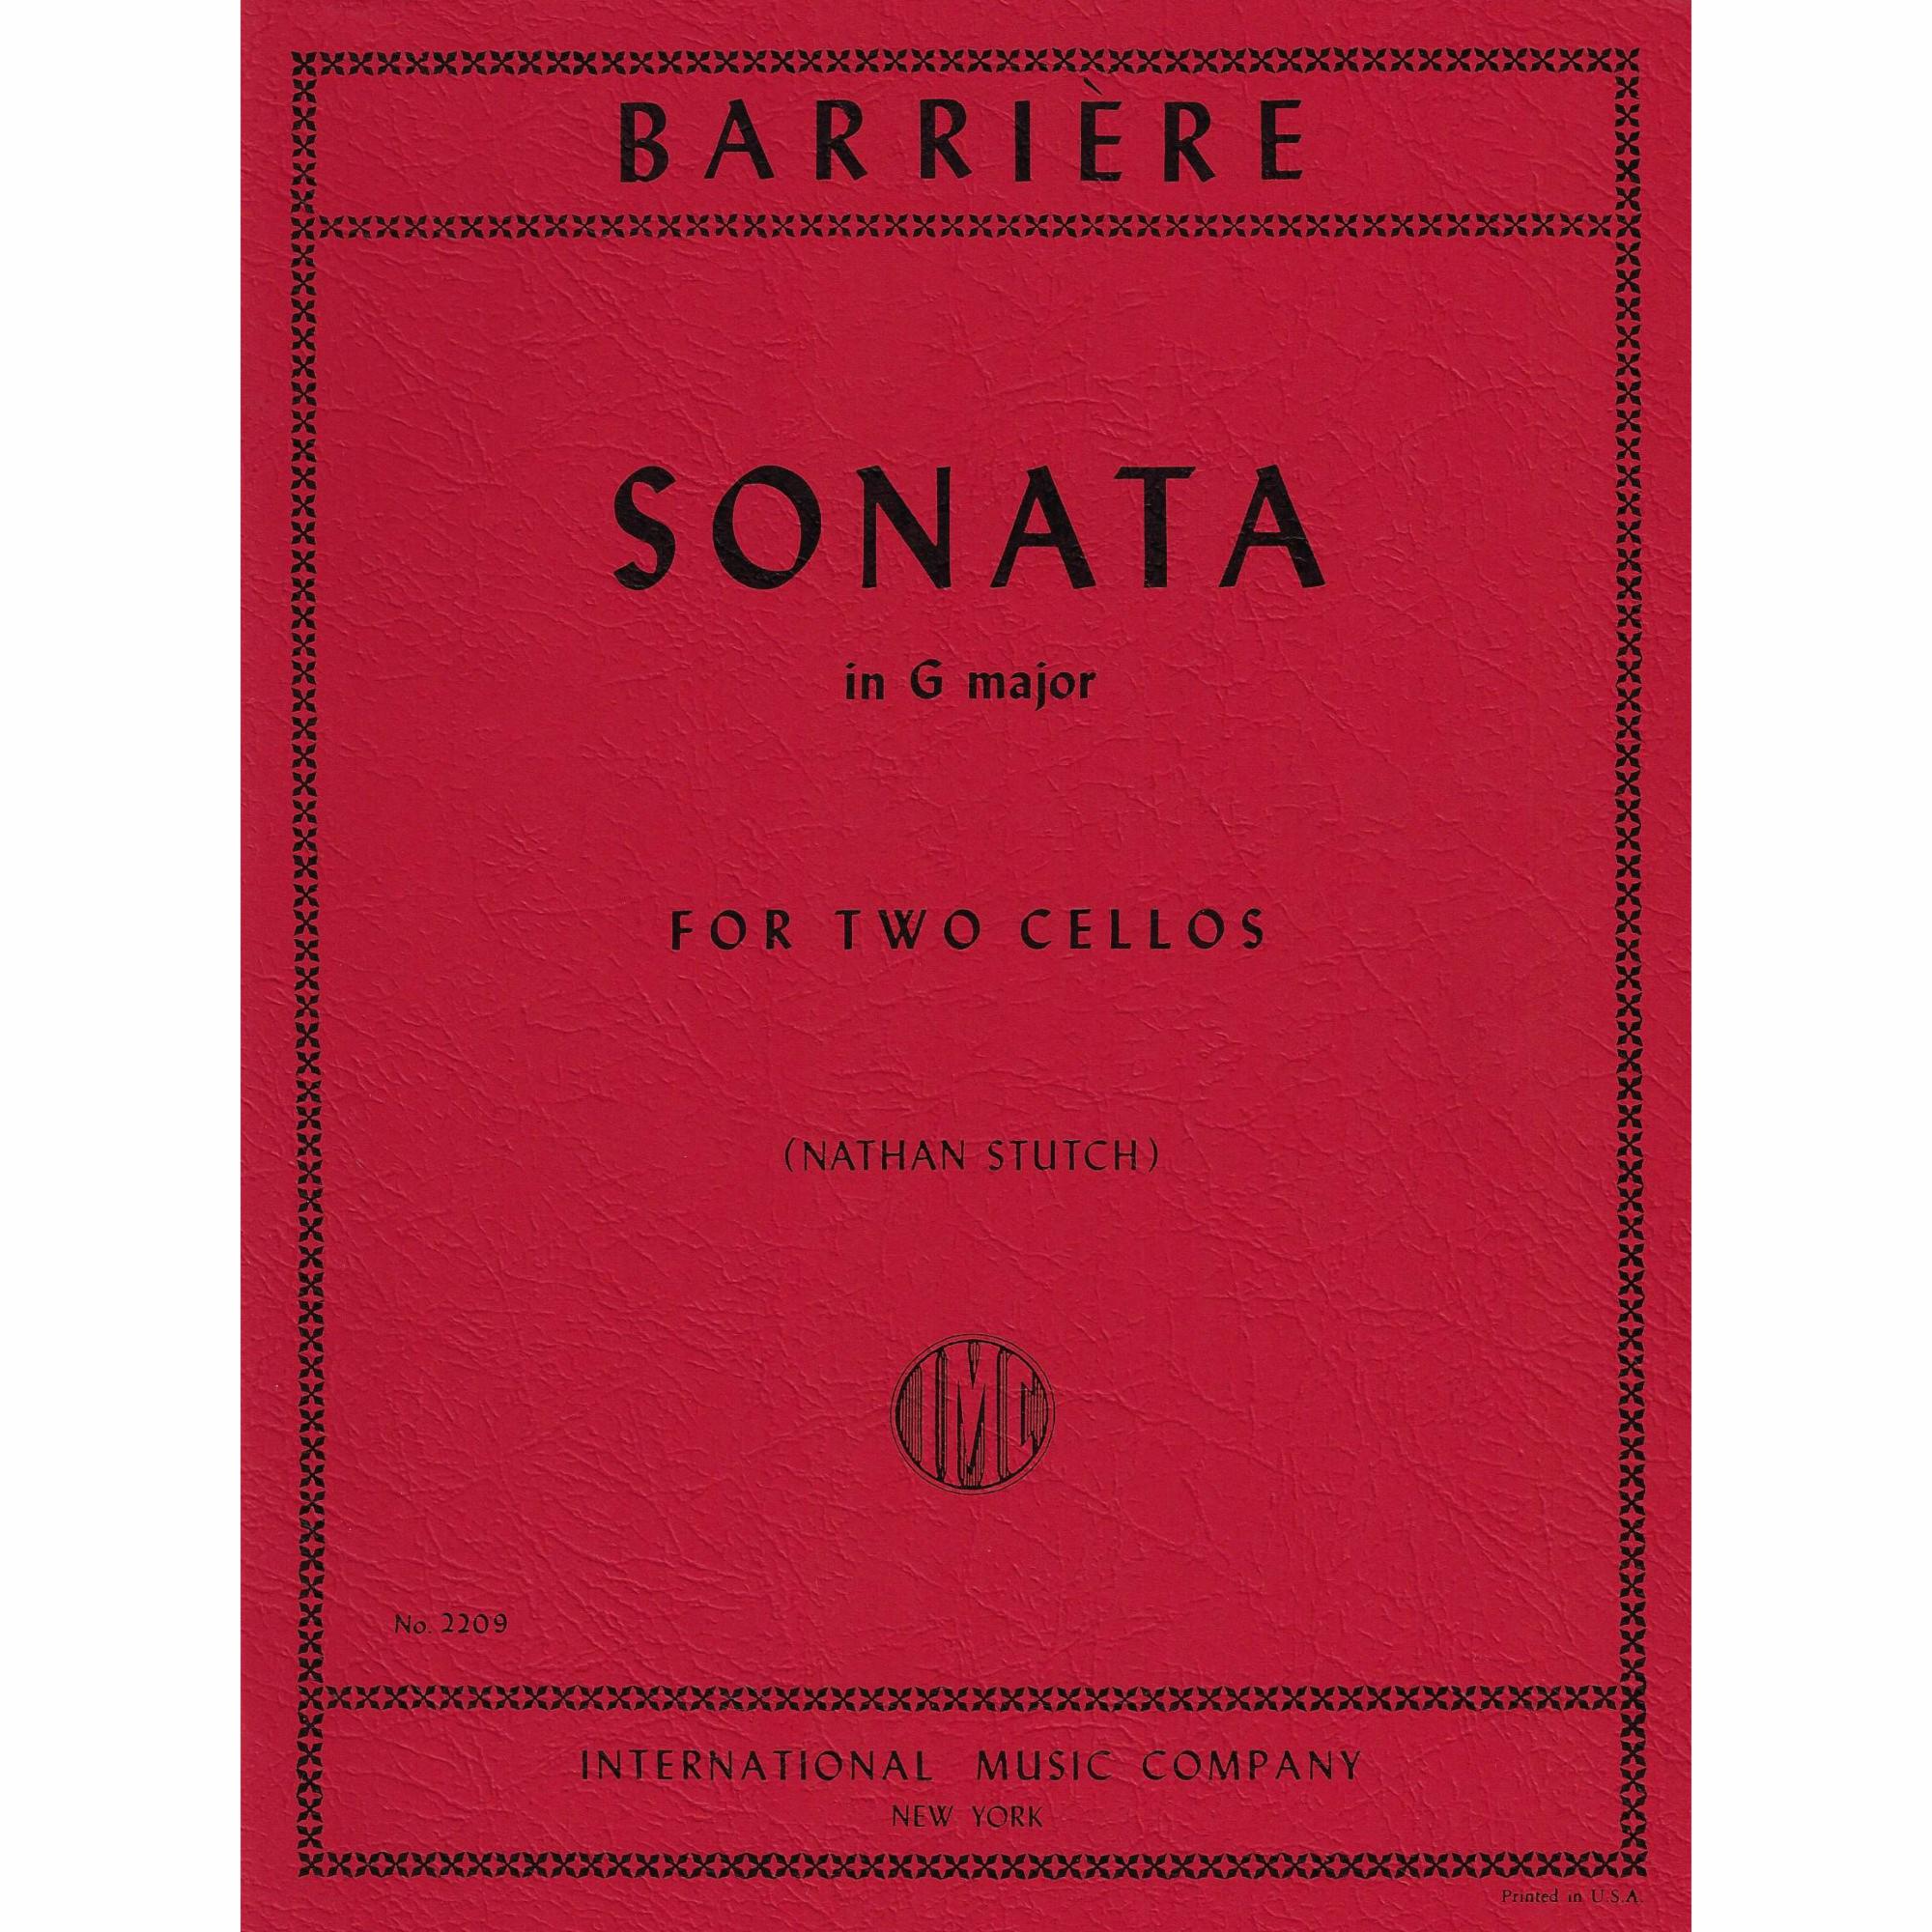 Barriere -- Sonata in G Major for Two Cellos